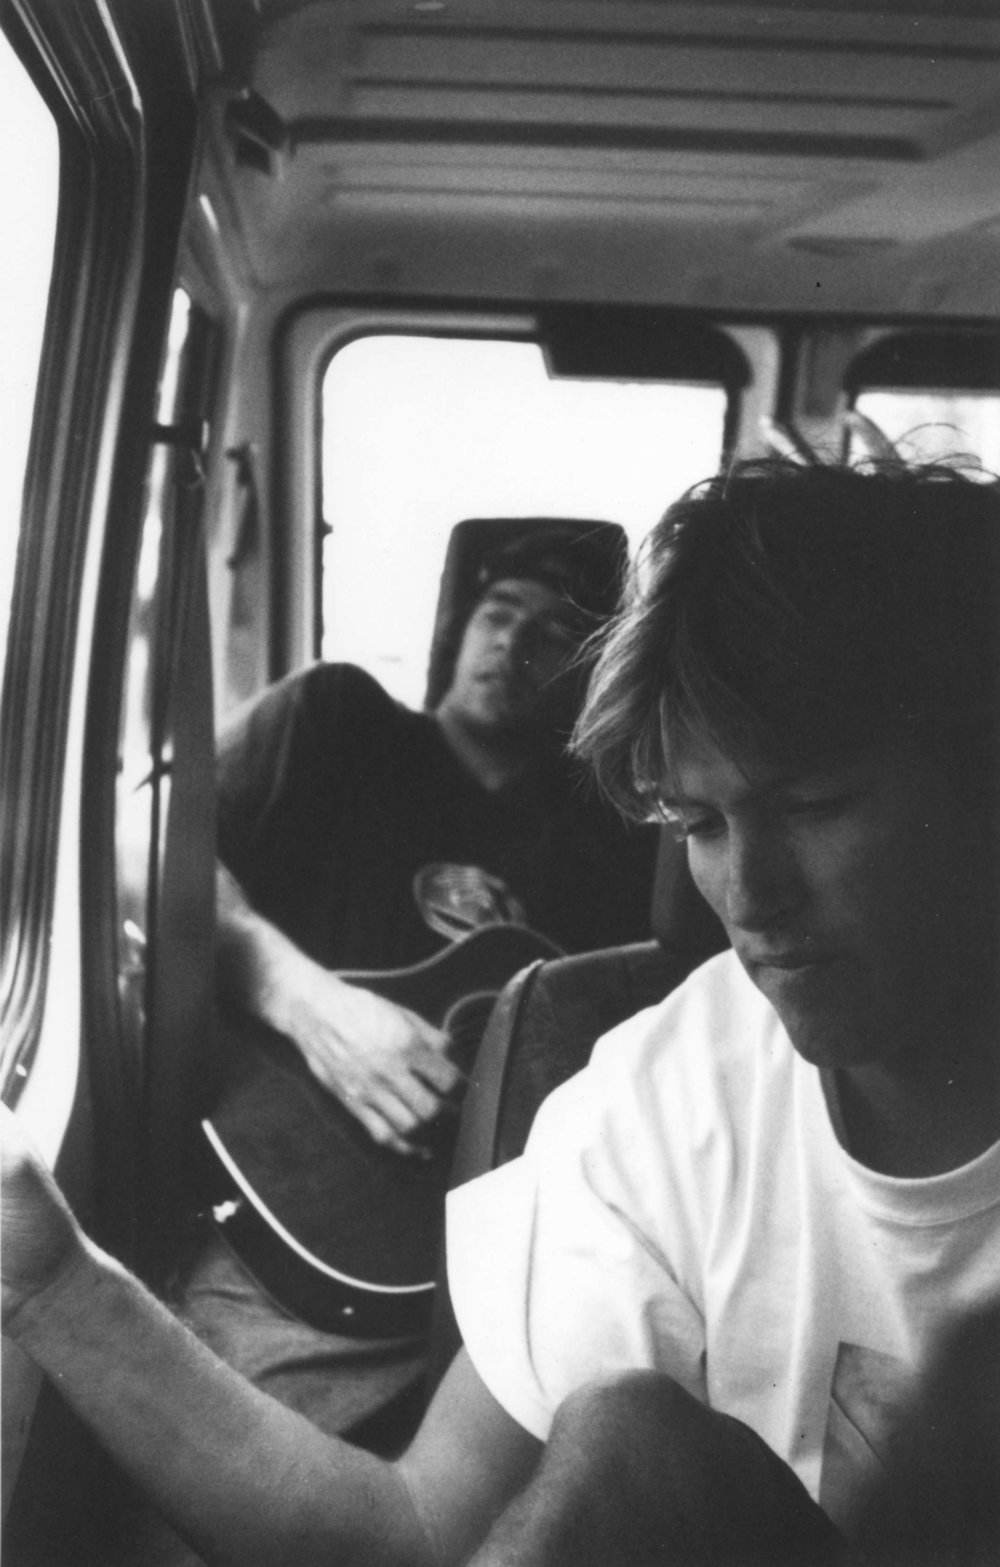 what youth back den with bruce irons and nathan fletcher shot by mark oblow